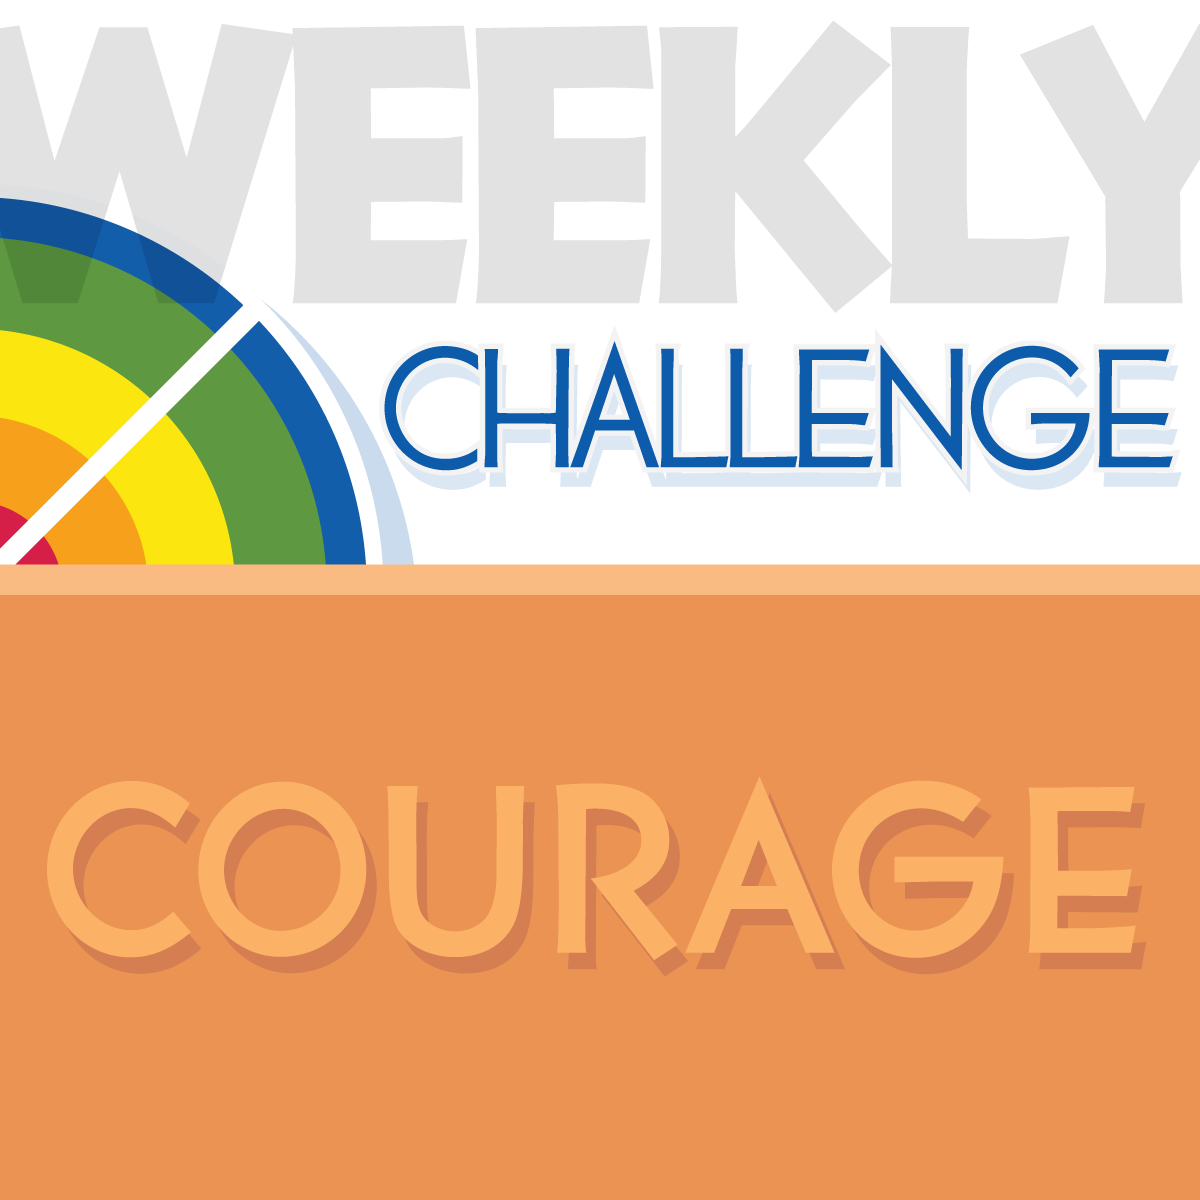 WC Quadrant 3 - The Gift of Courage